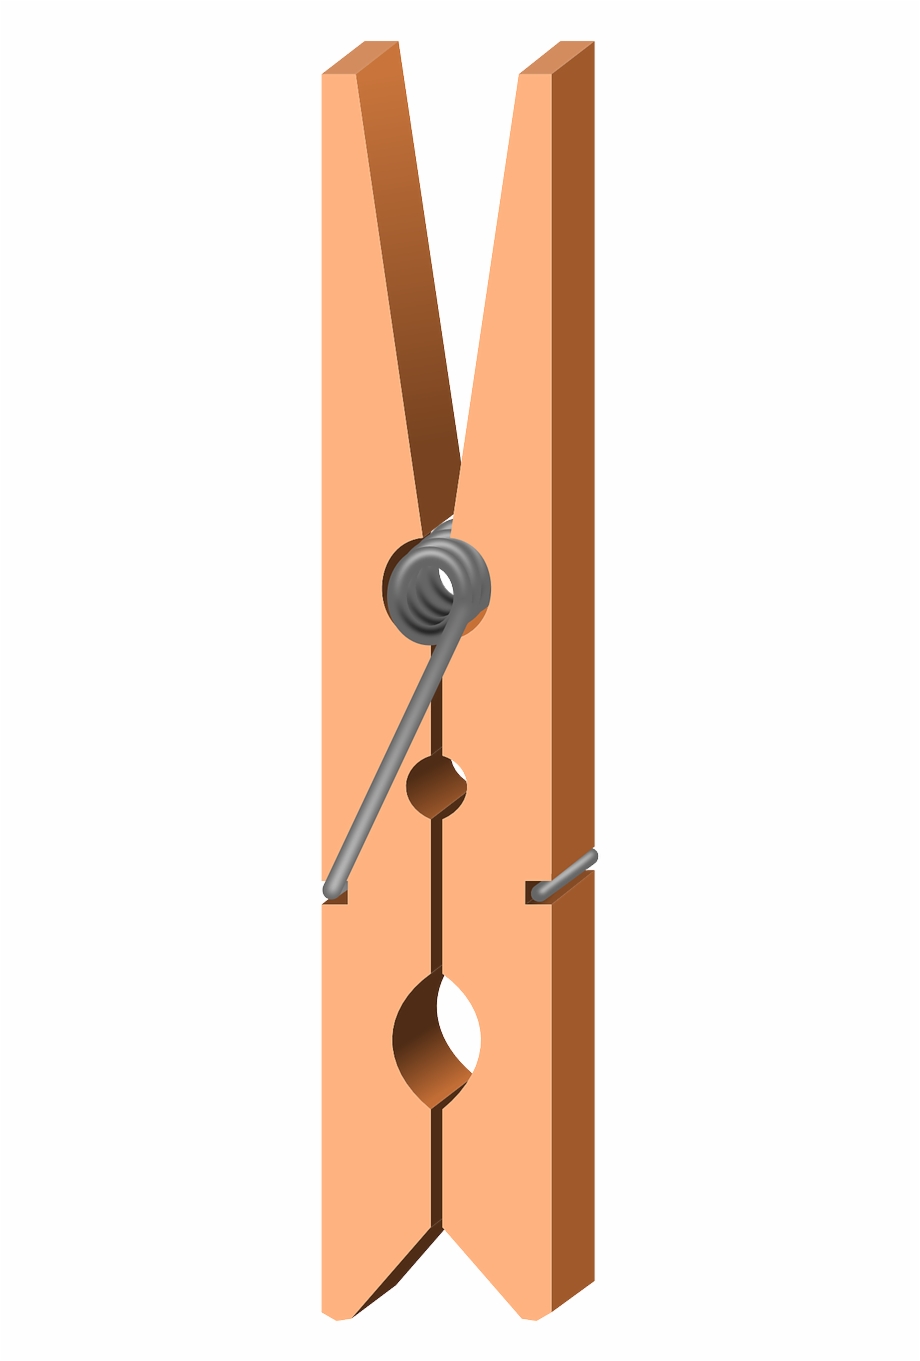 Clothespin clipart wooden peg. Png free images download